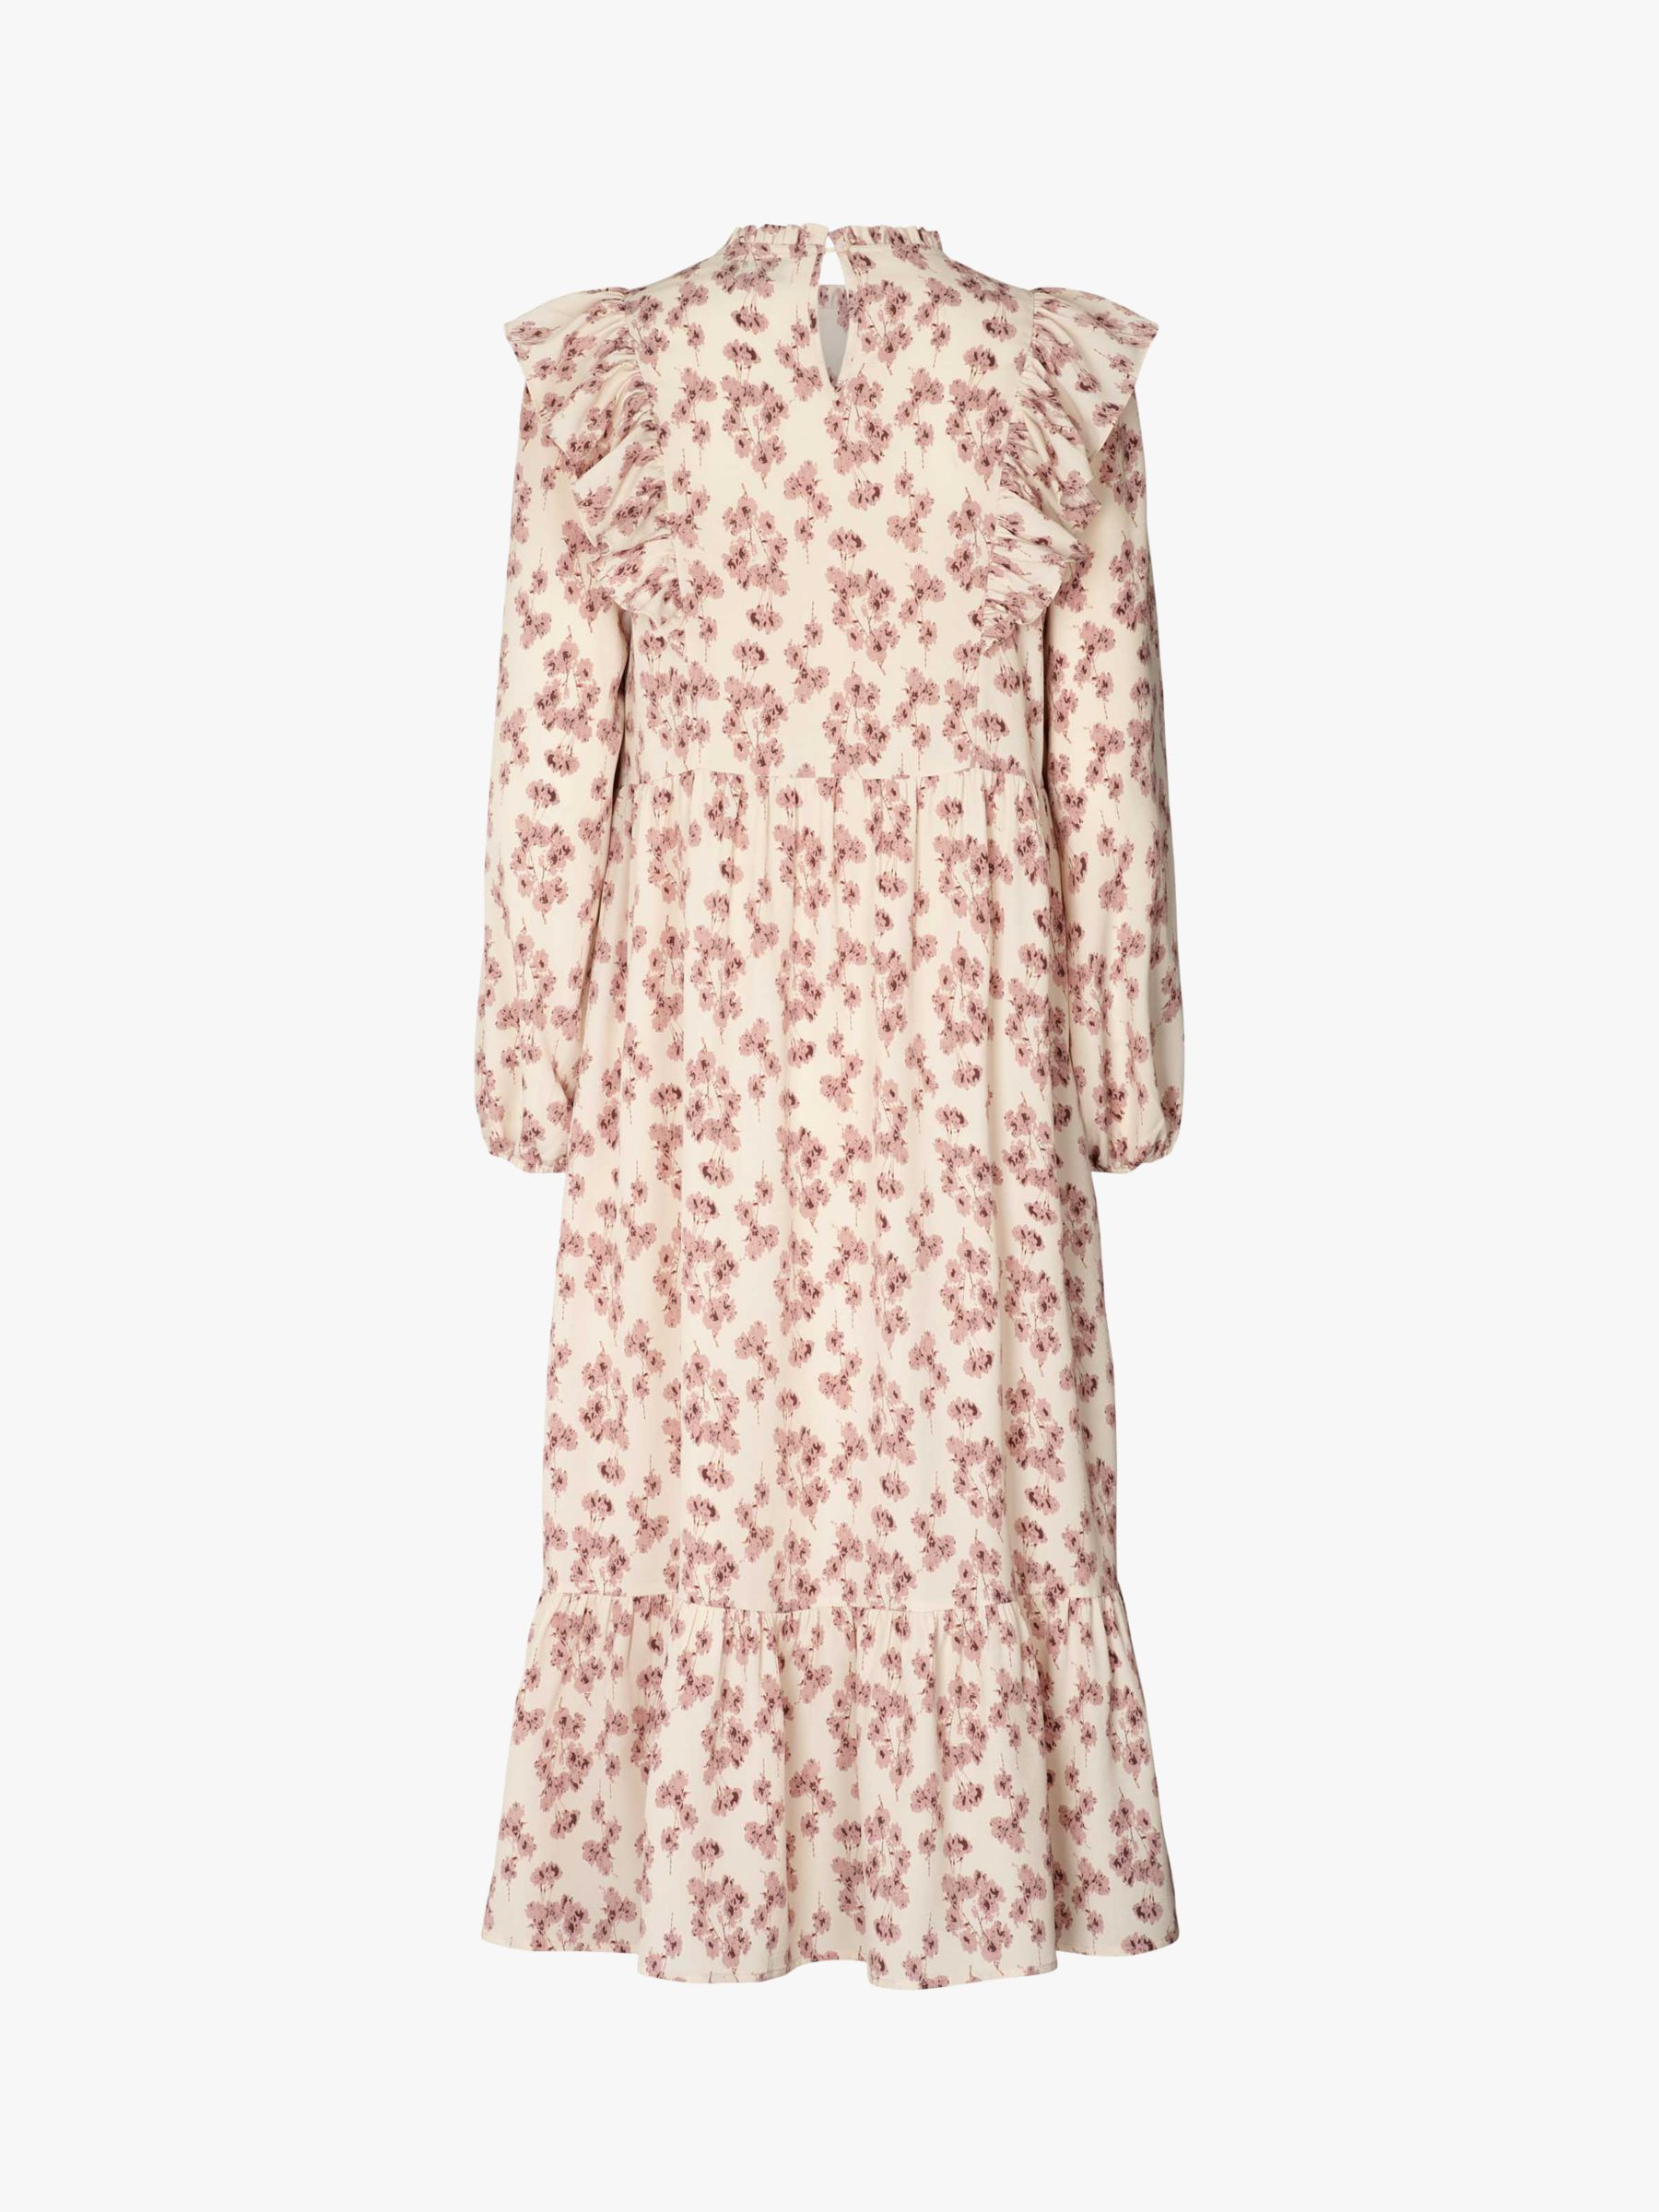 Buy Lollys Laundry Cana Floral Print Tiered Hem Midi Skirt, Creme Online at johnlewis.com